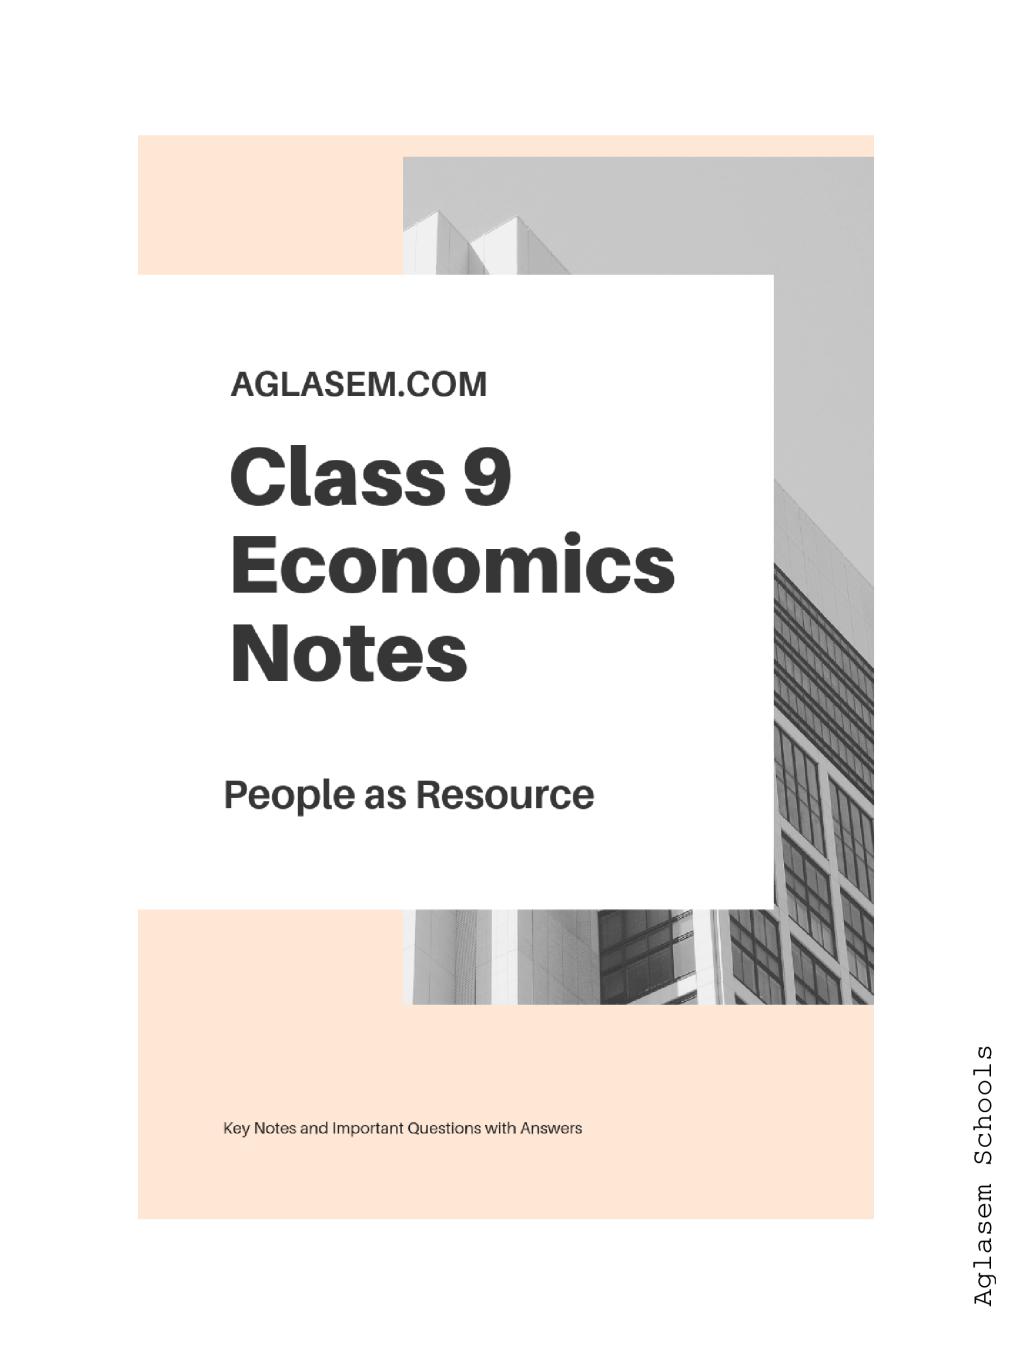 Class 9 Social Science Economics Notes for People as Resource - Page 1